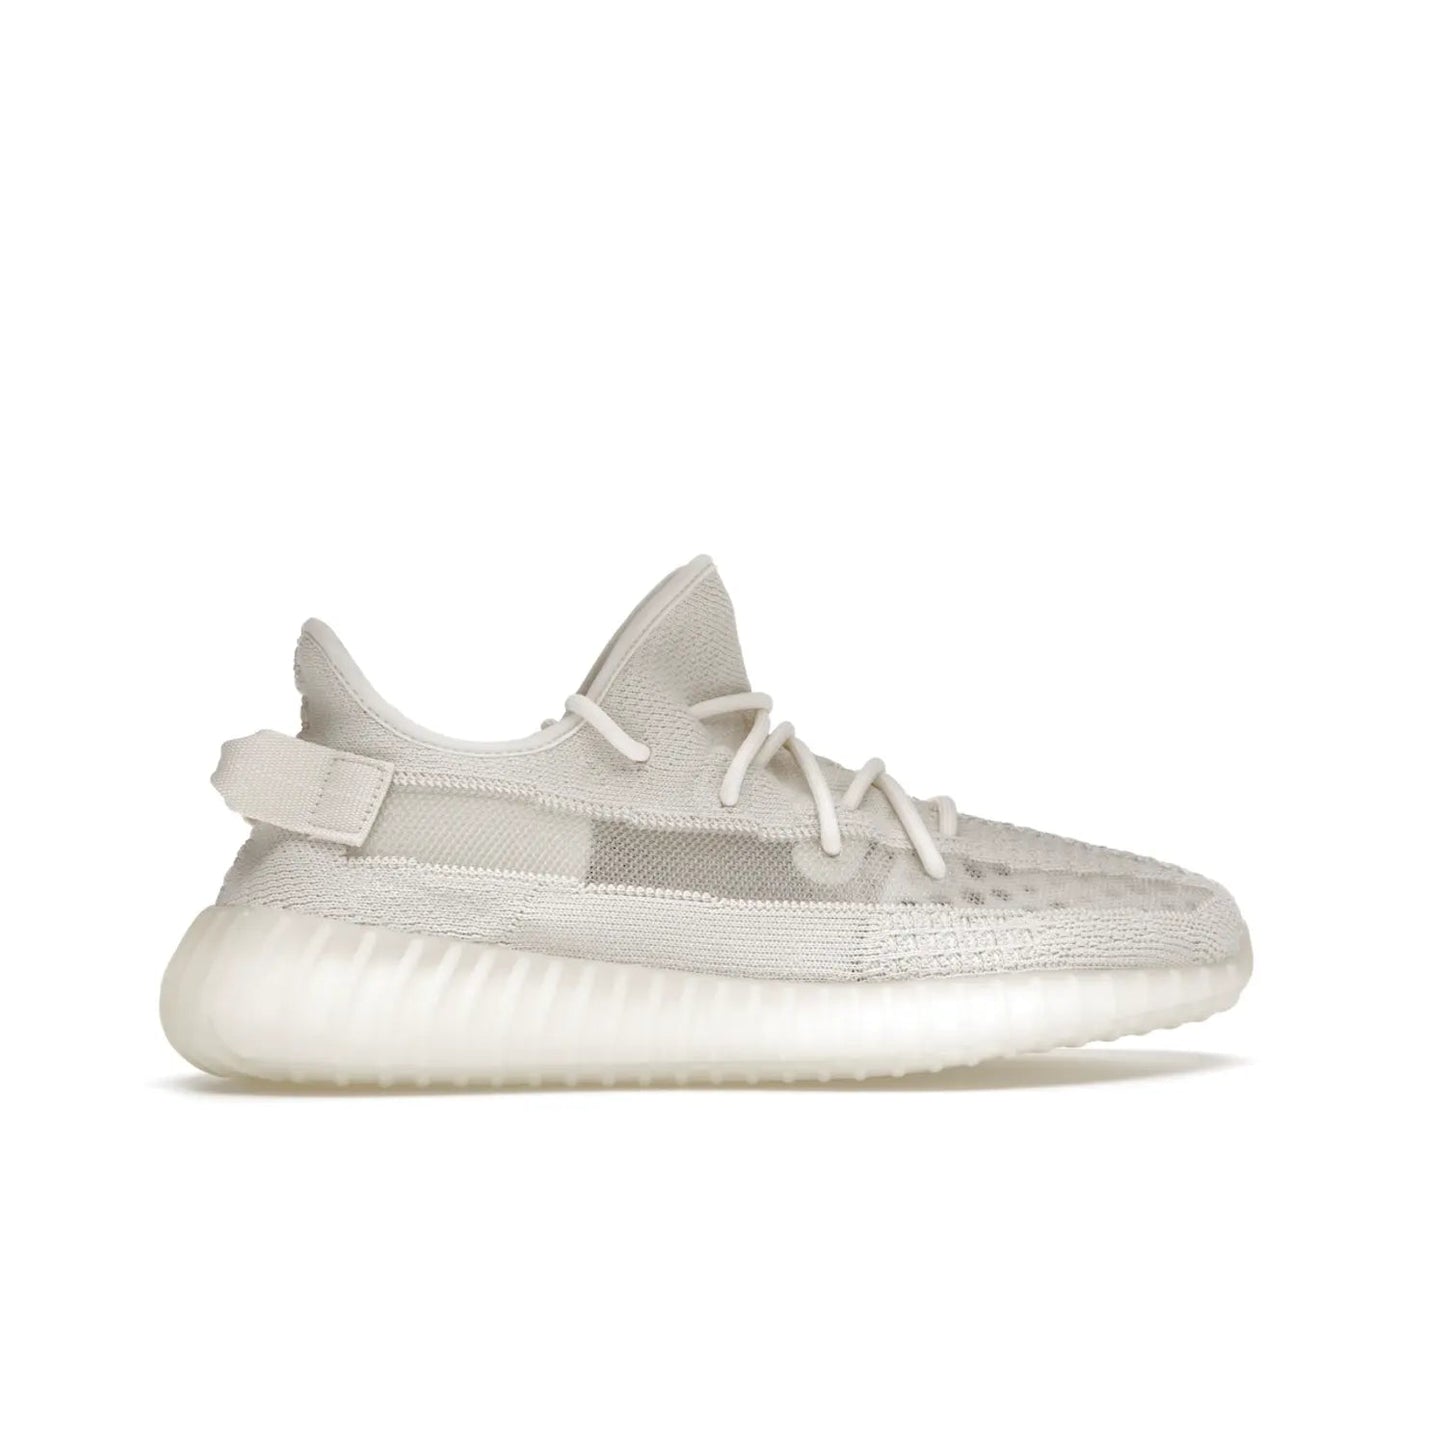 adidas Yeezy Boost 350 V2 Bone - Image 36 - Only at www.BallersClubKickz.com - Grab the stylish and comfortable adidas Yeezy Boost 350 V2 Bone in March 2022. This sneaker features a triple white Primeknit upper, mesh side stripes and canvas heel tabs, sitting atop a semi-translucent sole with Boost technology. Sure to keep your feet comfortable and stylish!